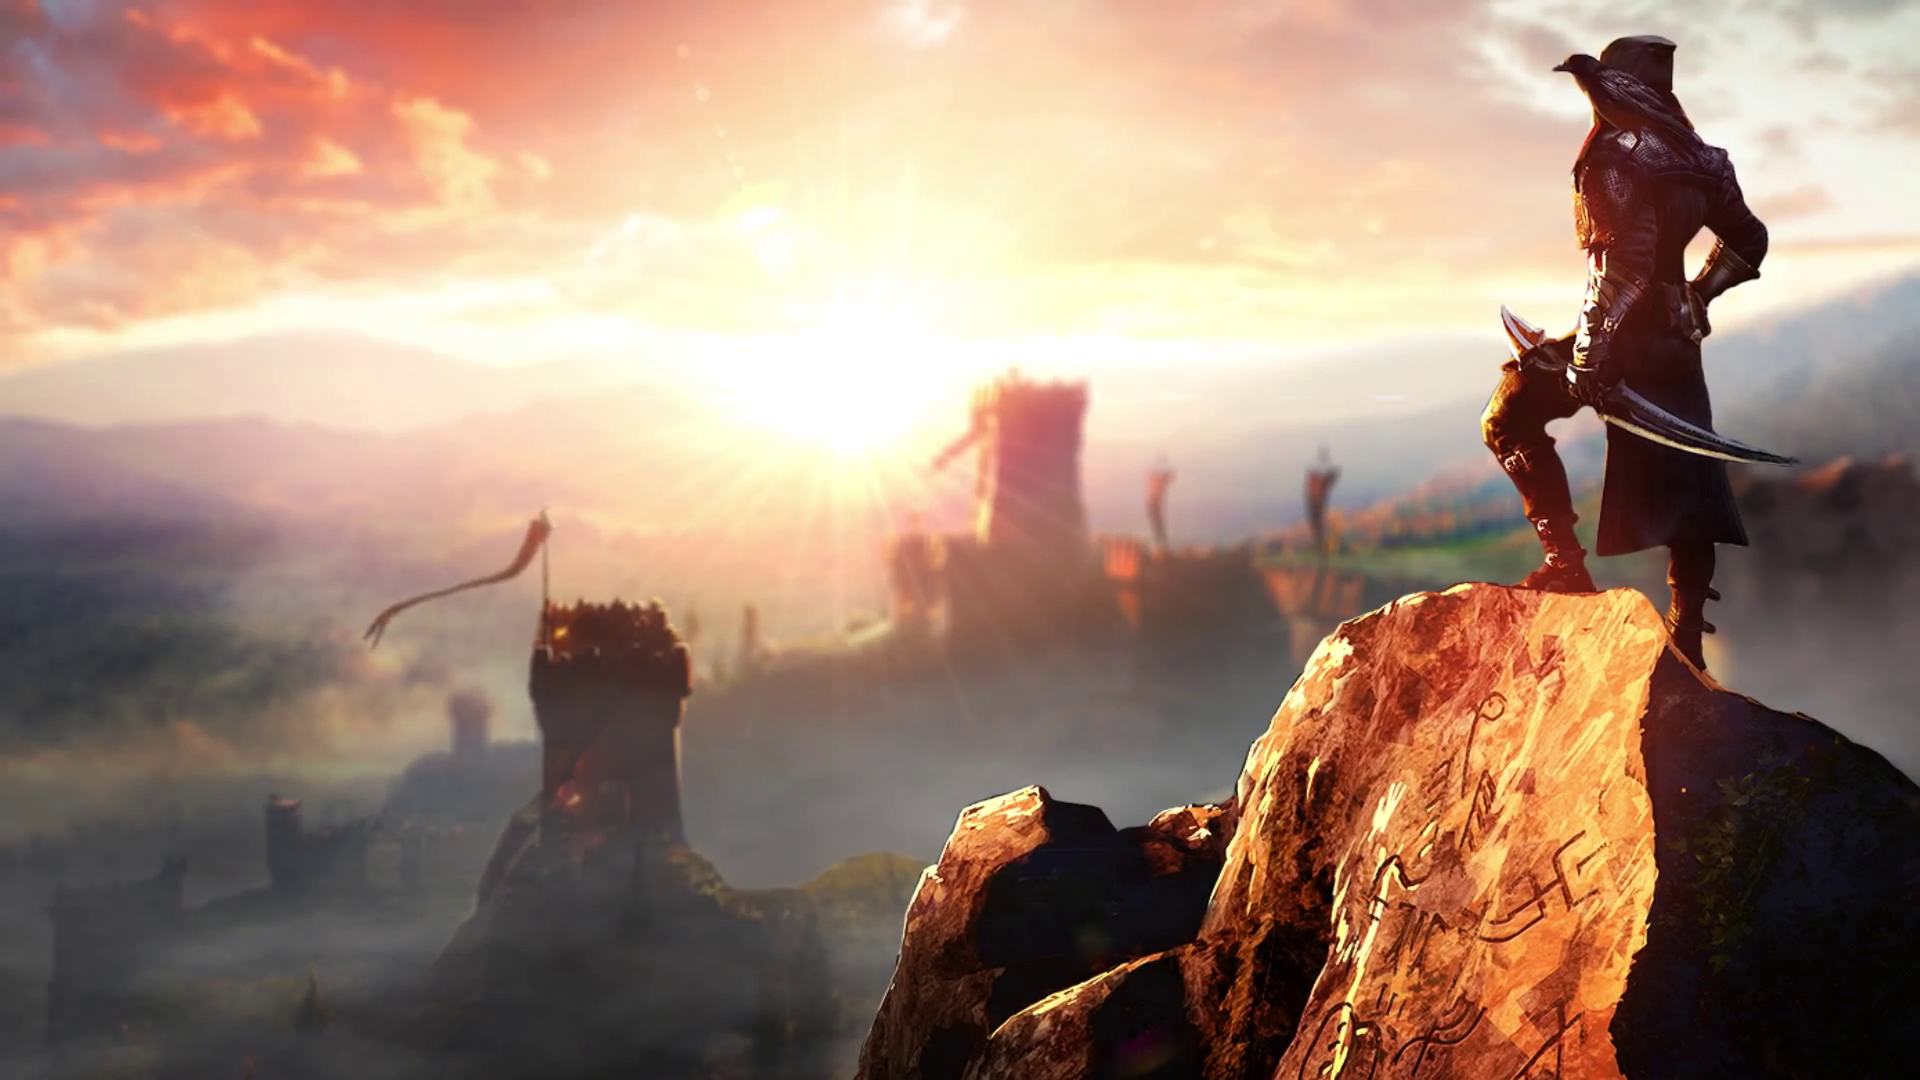 Dragon Age Inquisition the towers wallpapers and images   wallpapers 1920x1080